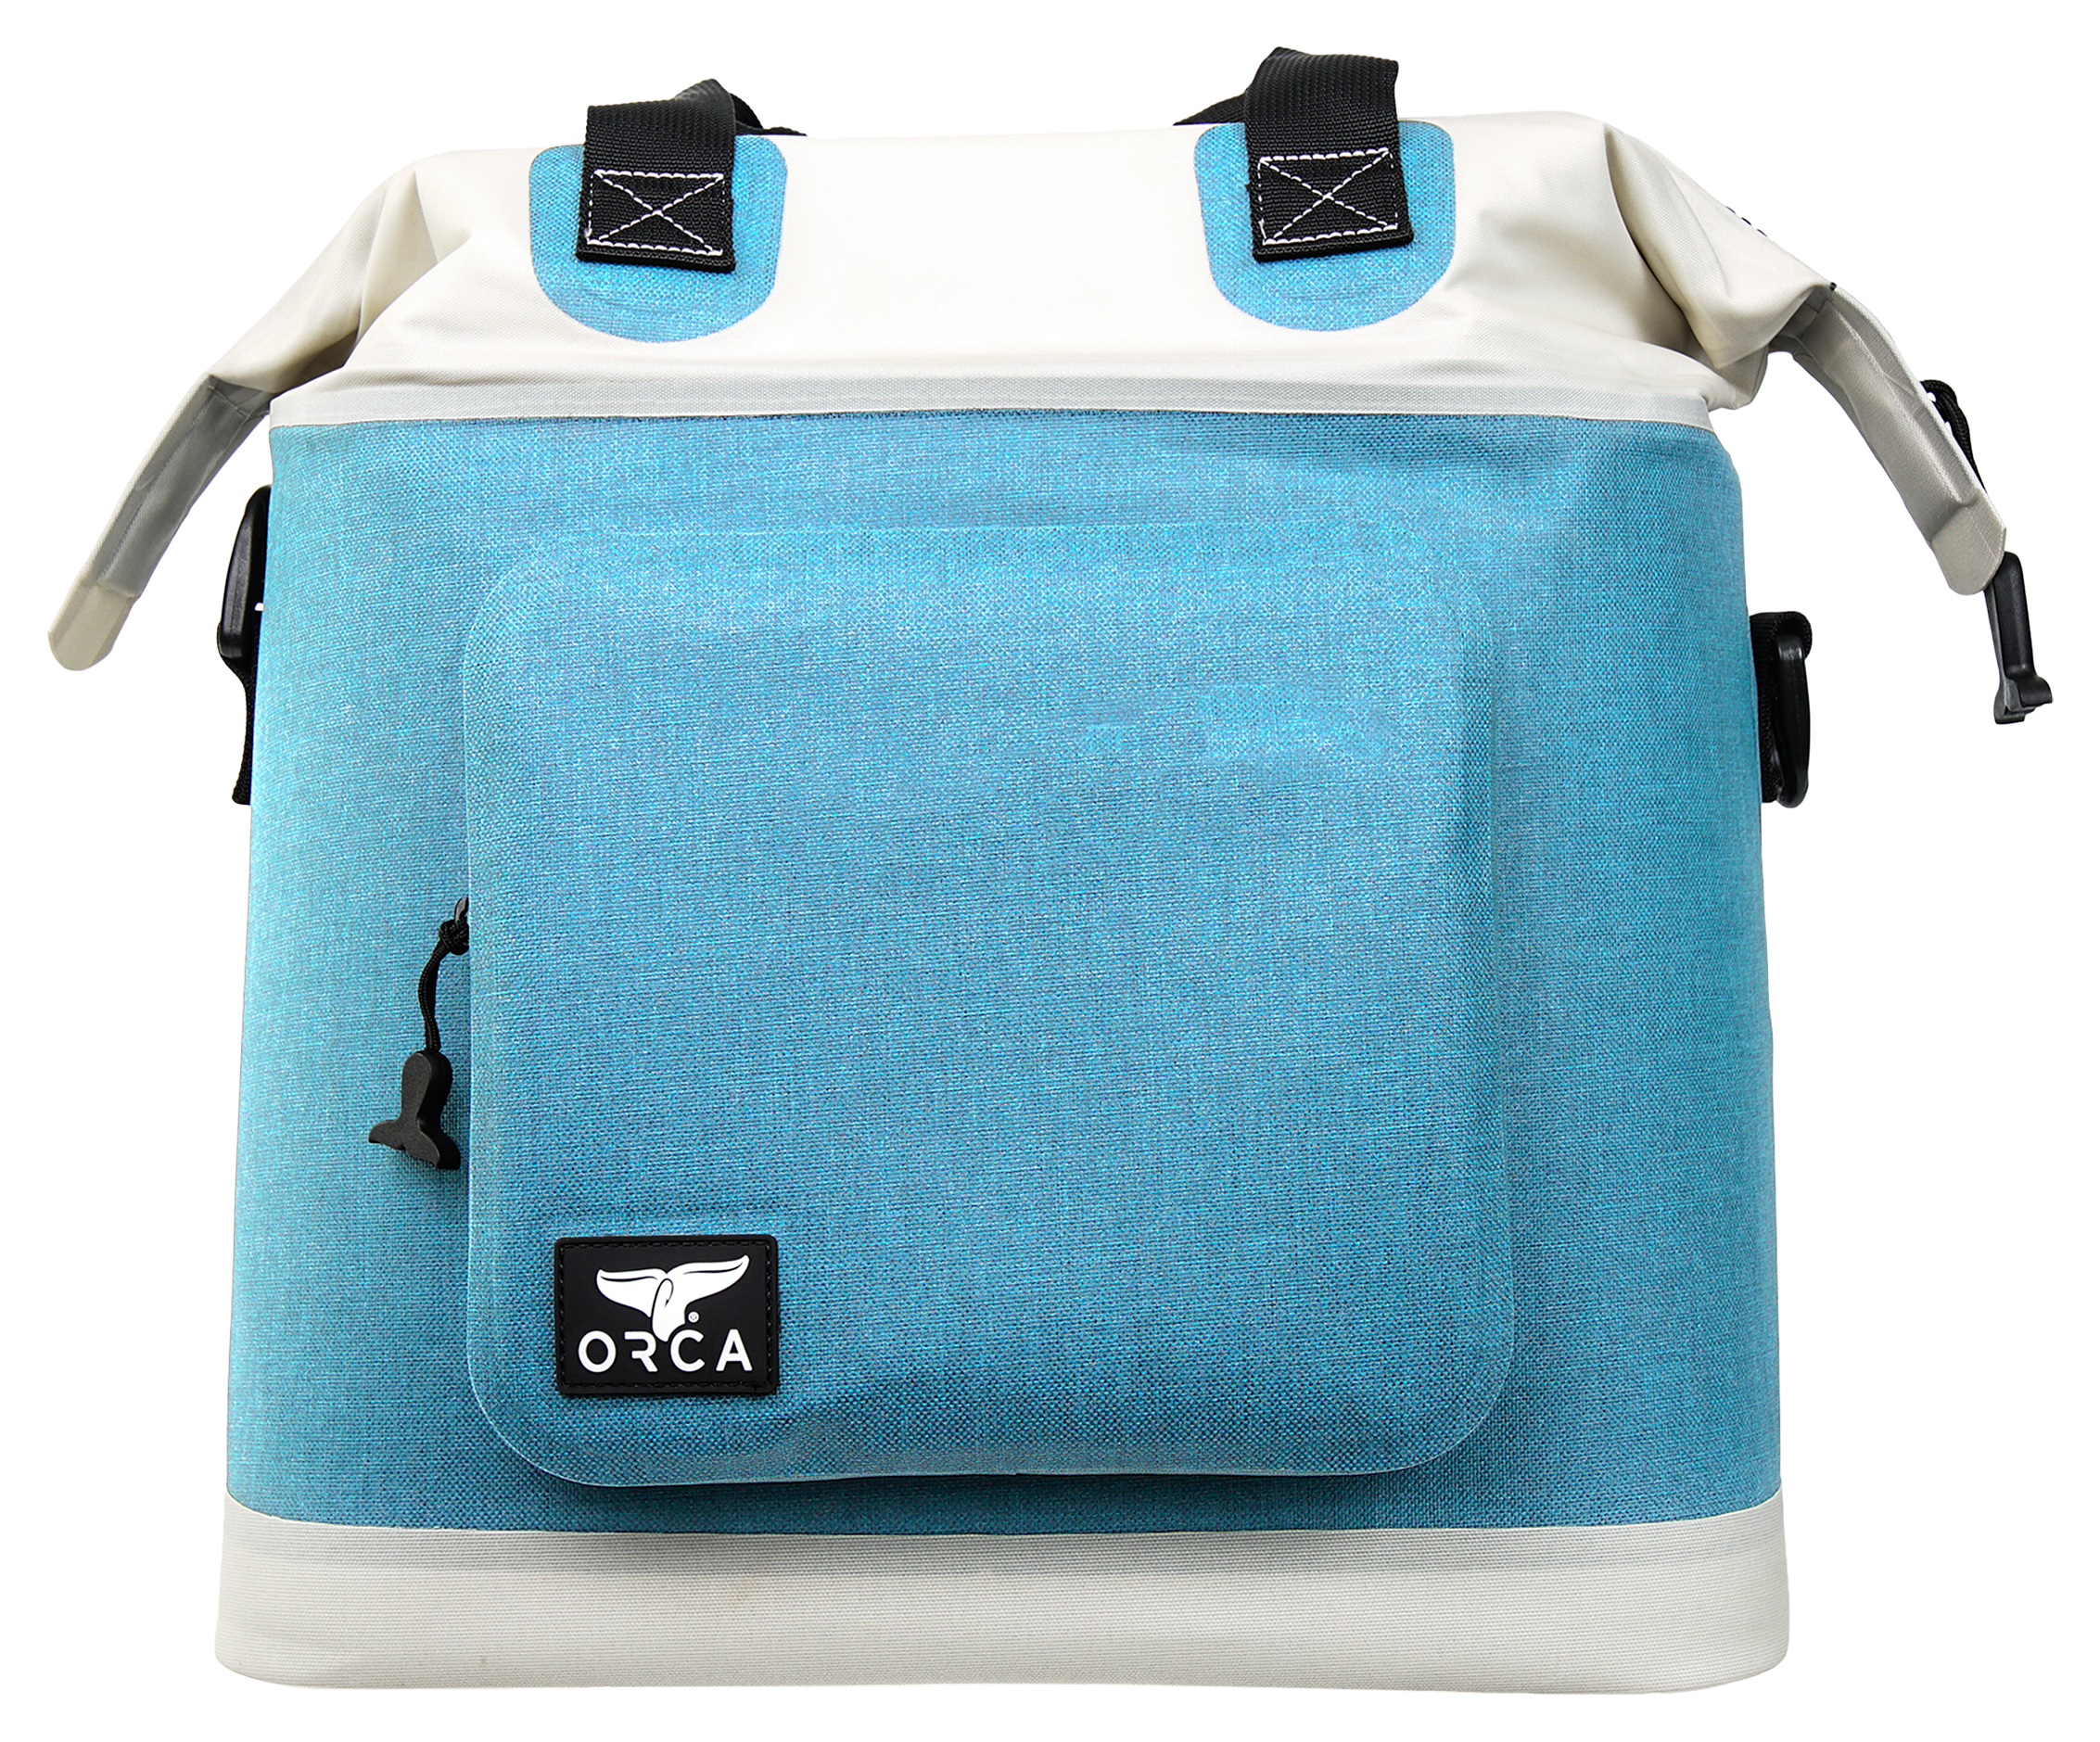 So Young Cooler Bag Review